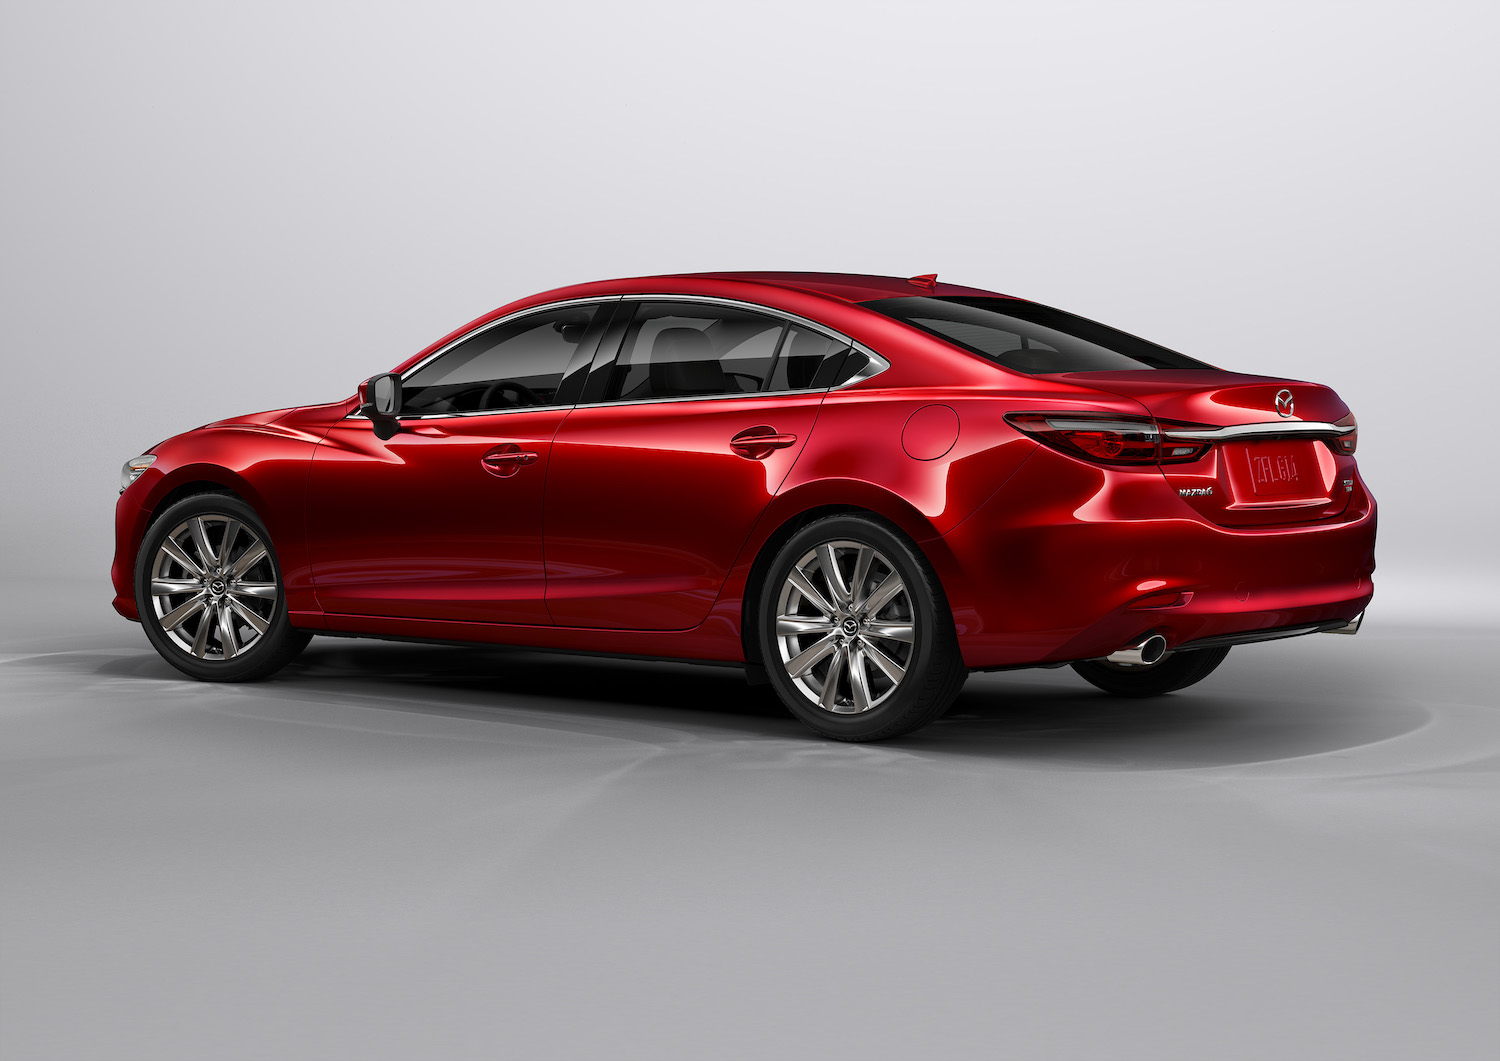 This red 2021 Mazda 6 is a discontinued car | Mazda